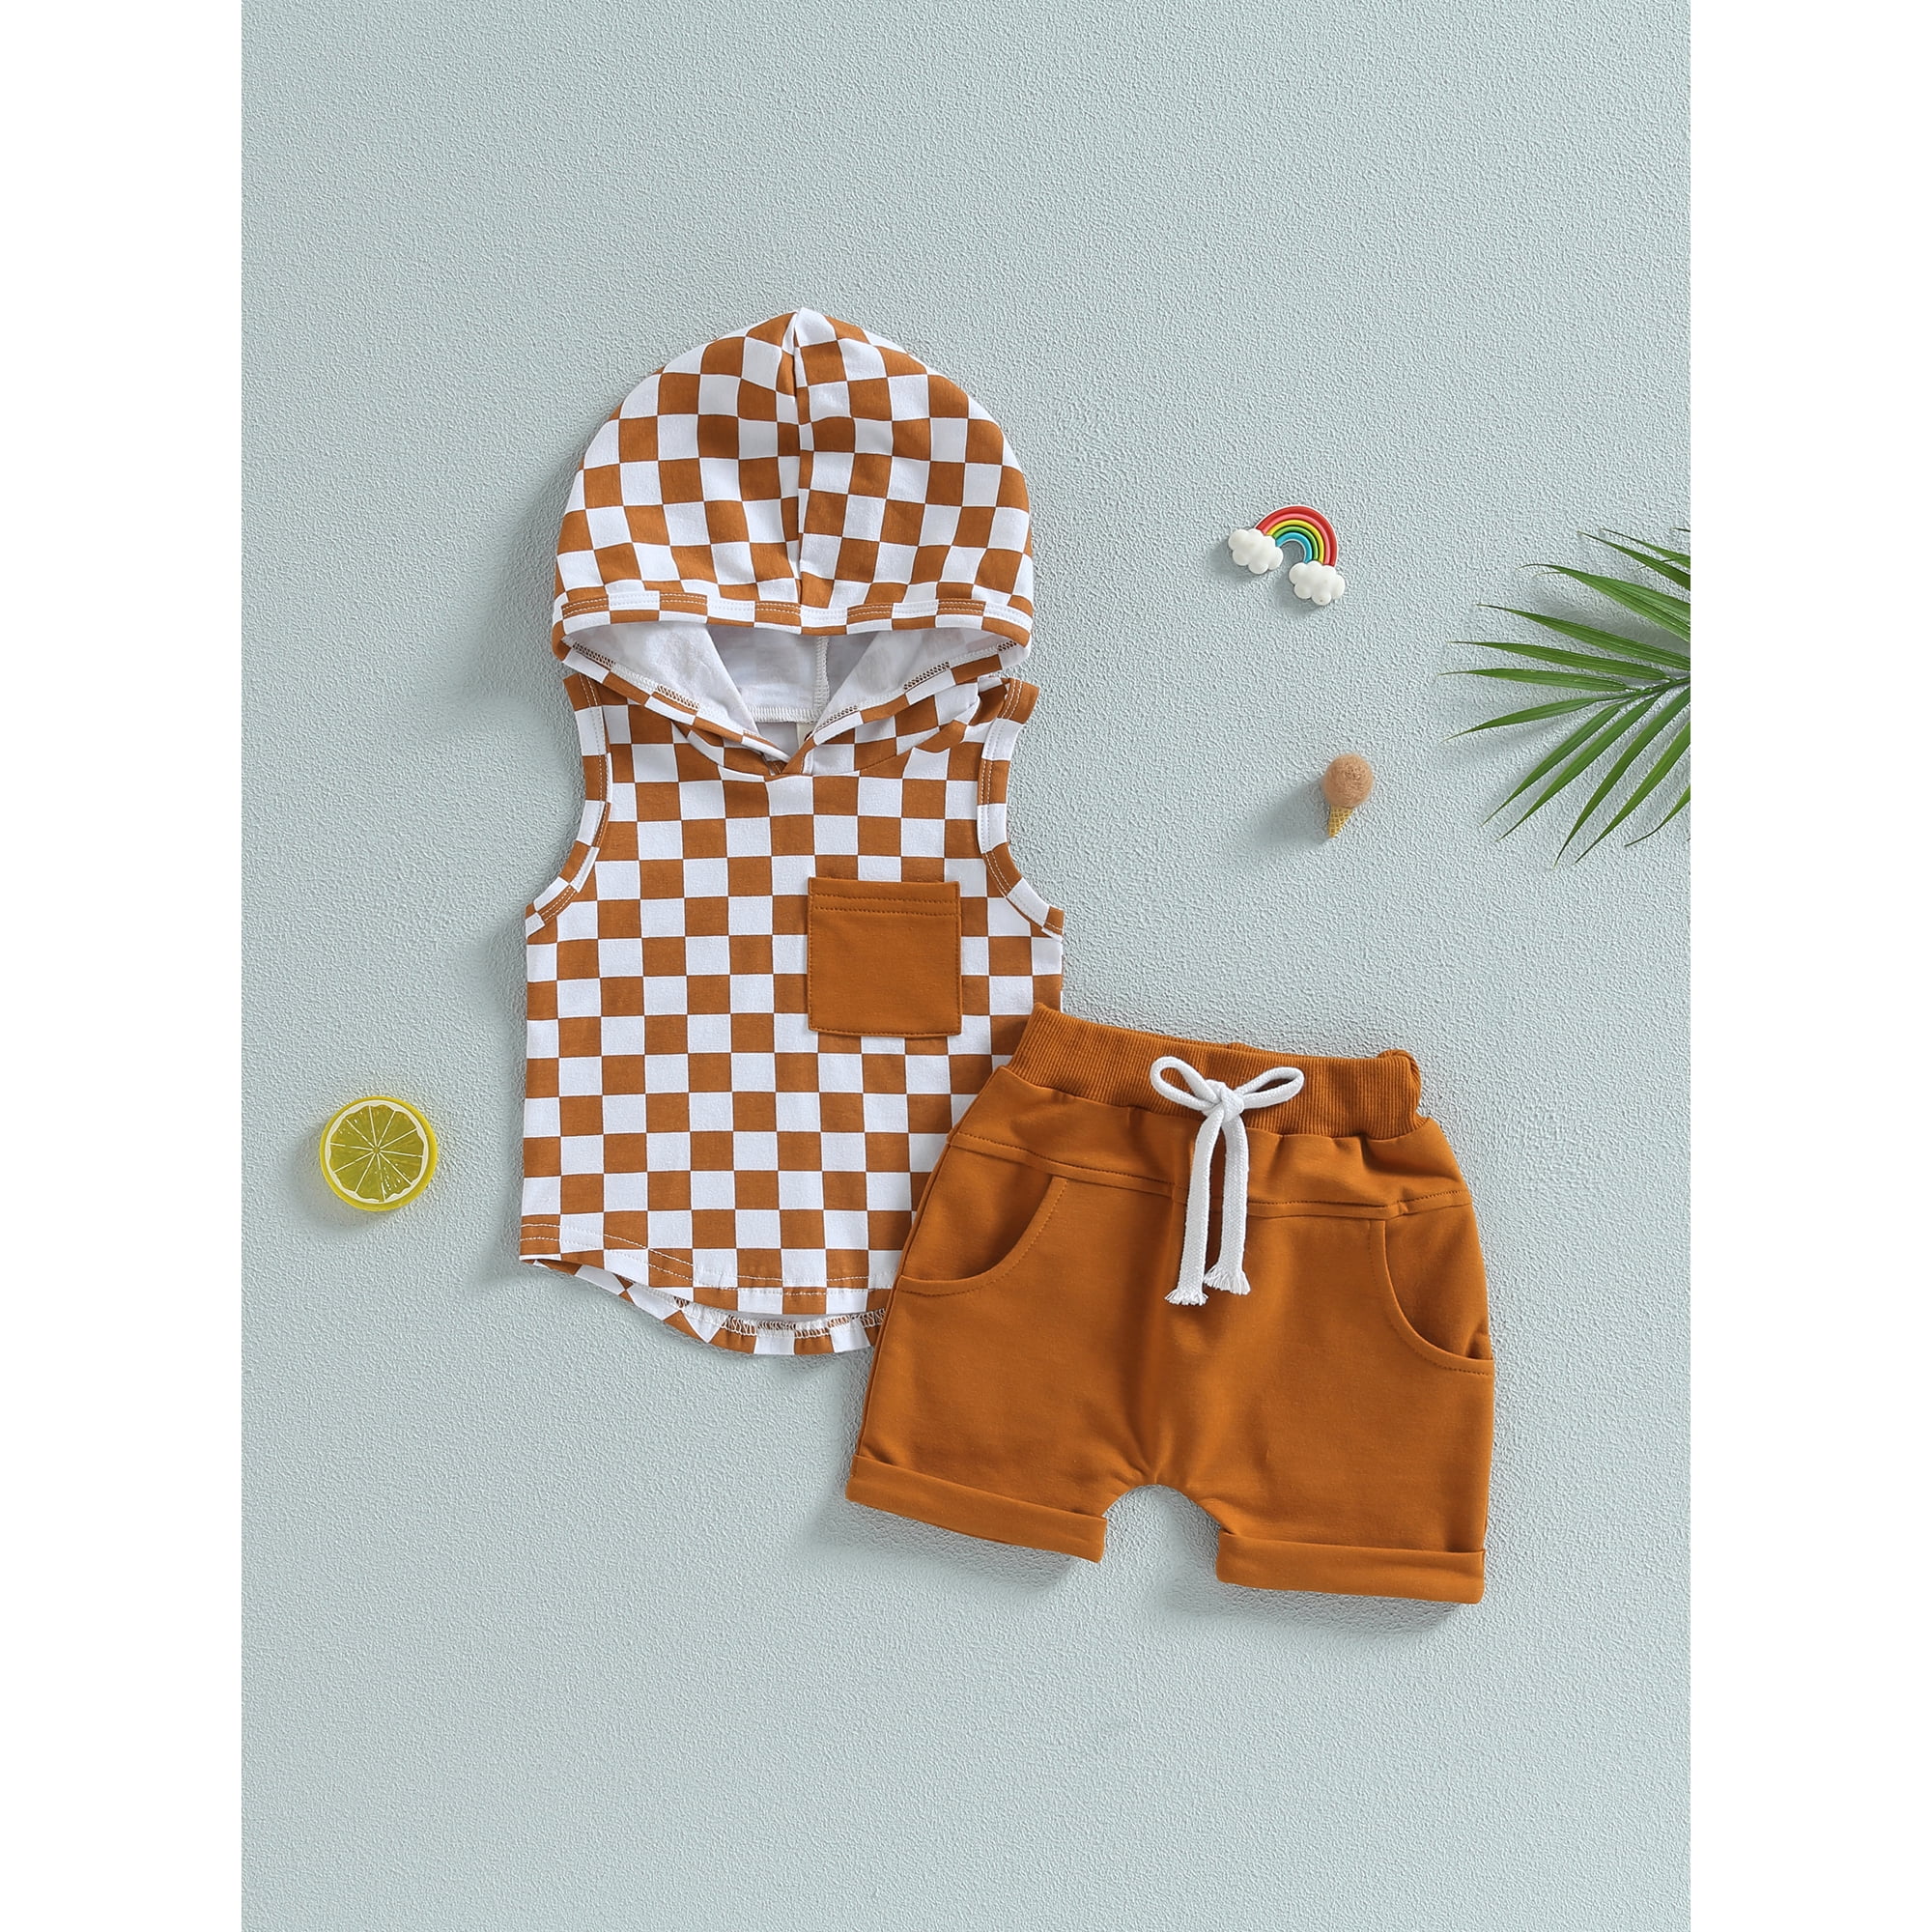 Sunisery Toddler Baby Boys Summer Vest Shorts Outfits Checkerboard  Sleeveless Hoodie T-shirt Casual Shorts Sets Brown 6-12 Months 